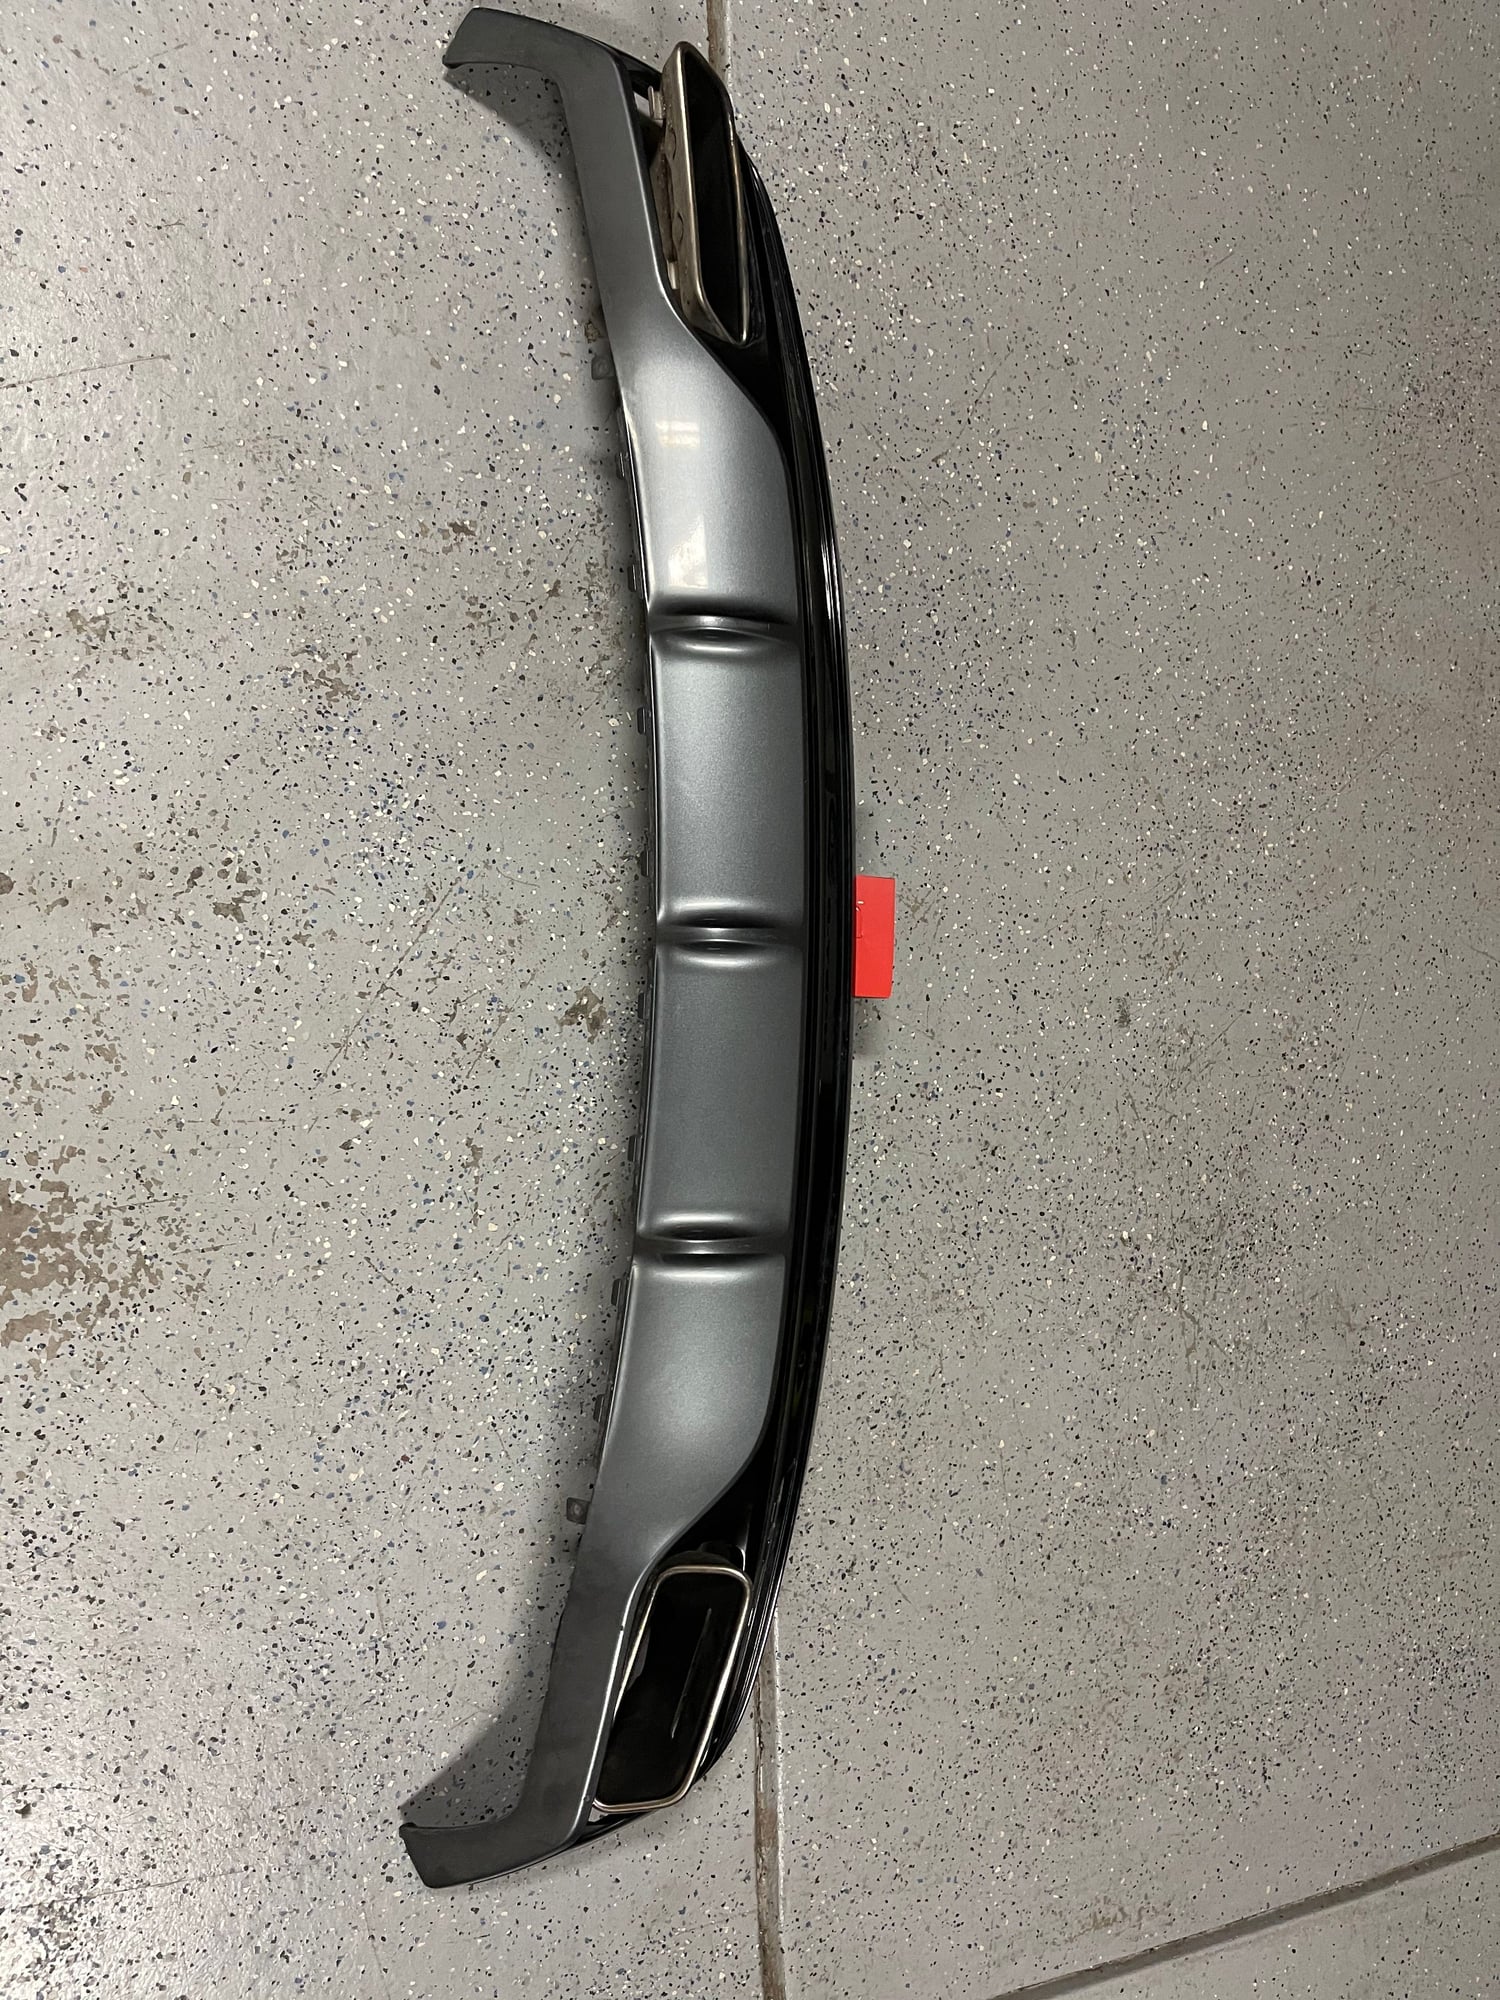 Exterior Body Parts - Mercedes OEM rear diffuser & exhaust tips C217 S550 coupe - perfect condition - $450 - Used - 2014 to 2017 Mercedes-Benz S550 - Centennial, CO 80016, United States